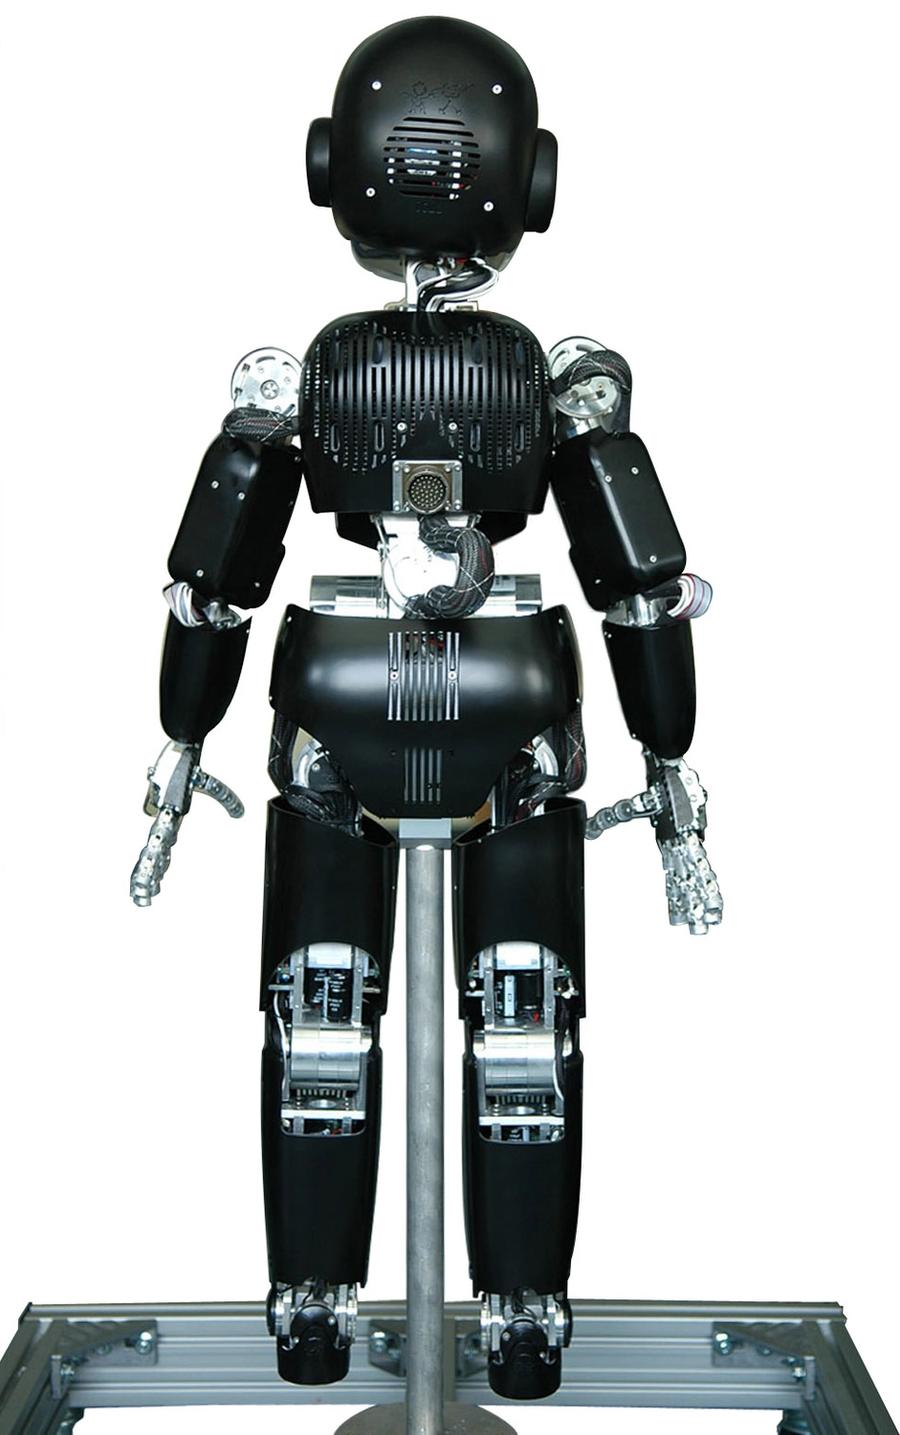 Rear view of the black and silver child-like humanoid robot.